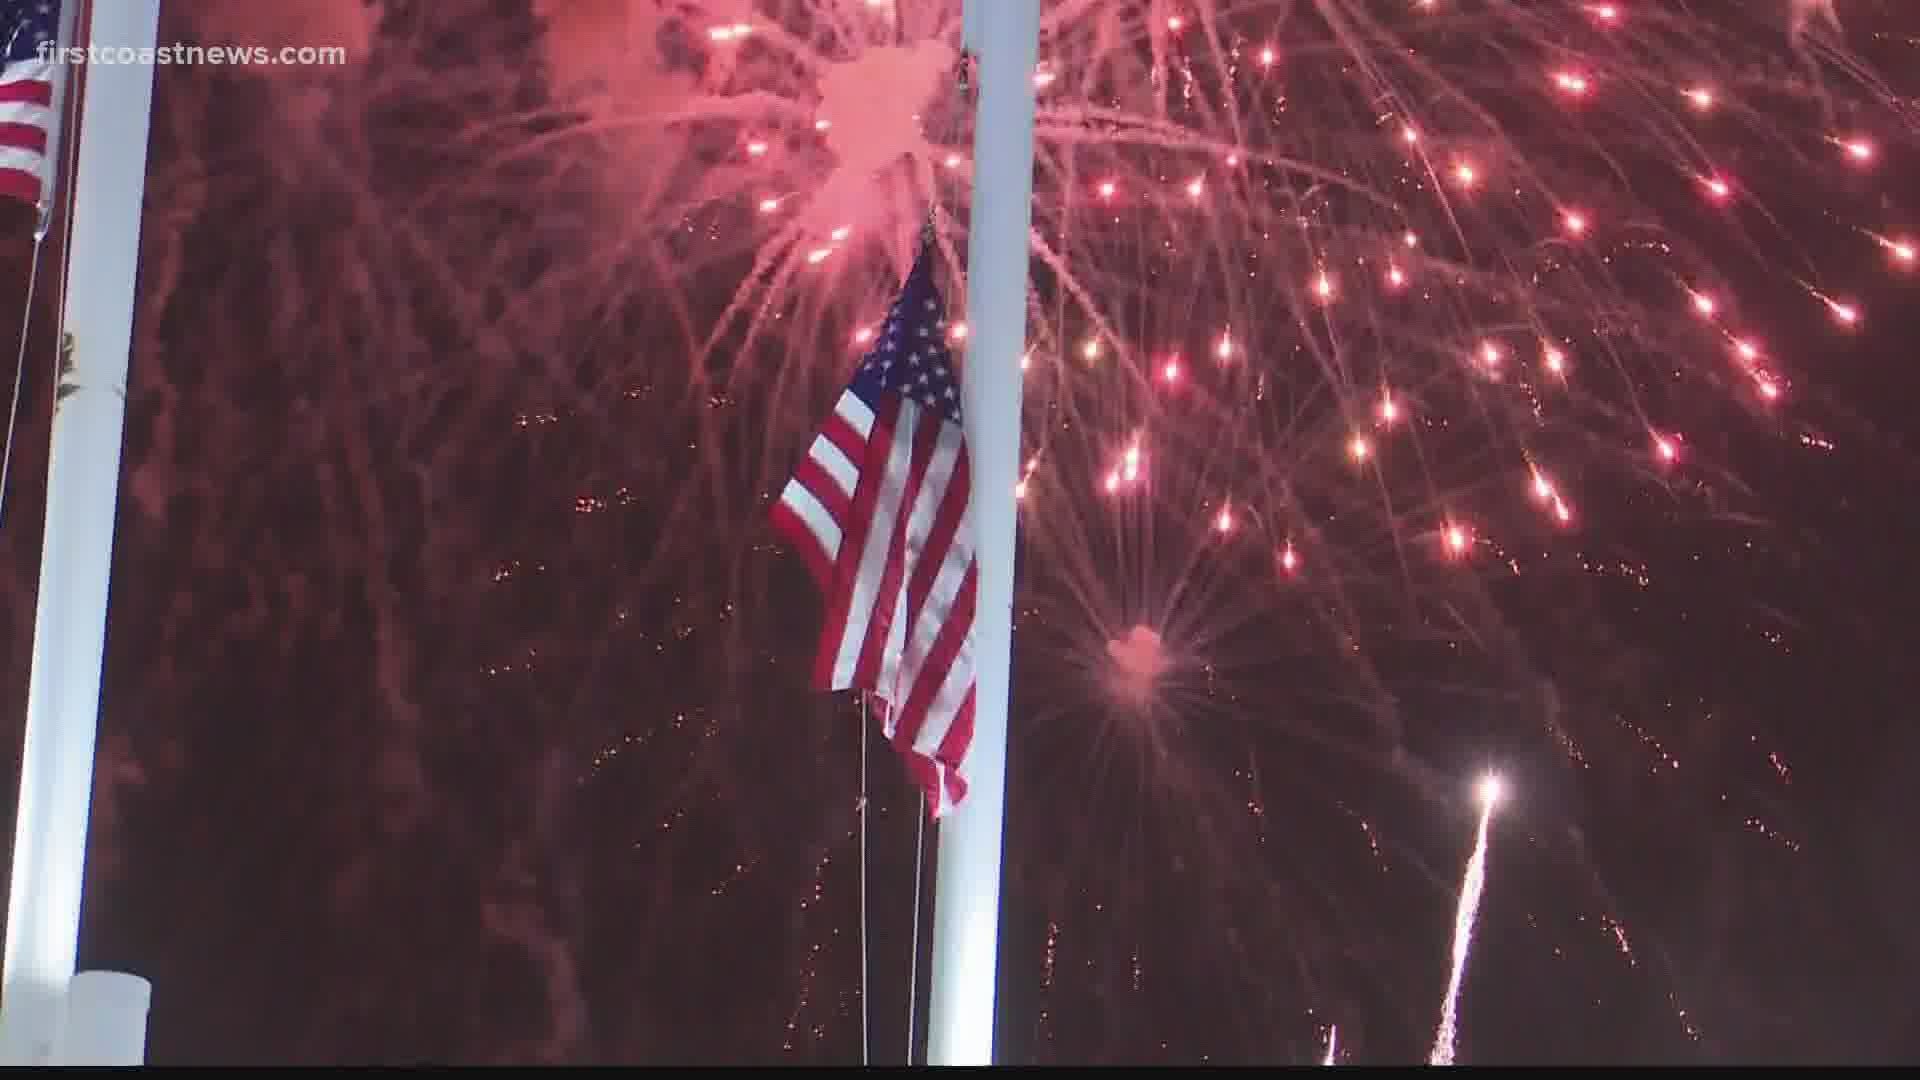 Mayor Lenny Curry said the fireworks viewing sites will be dispersed throughout the community to prevent spectators from crowding in one area.